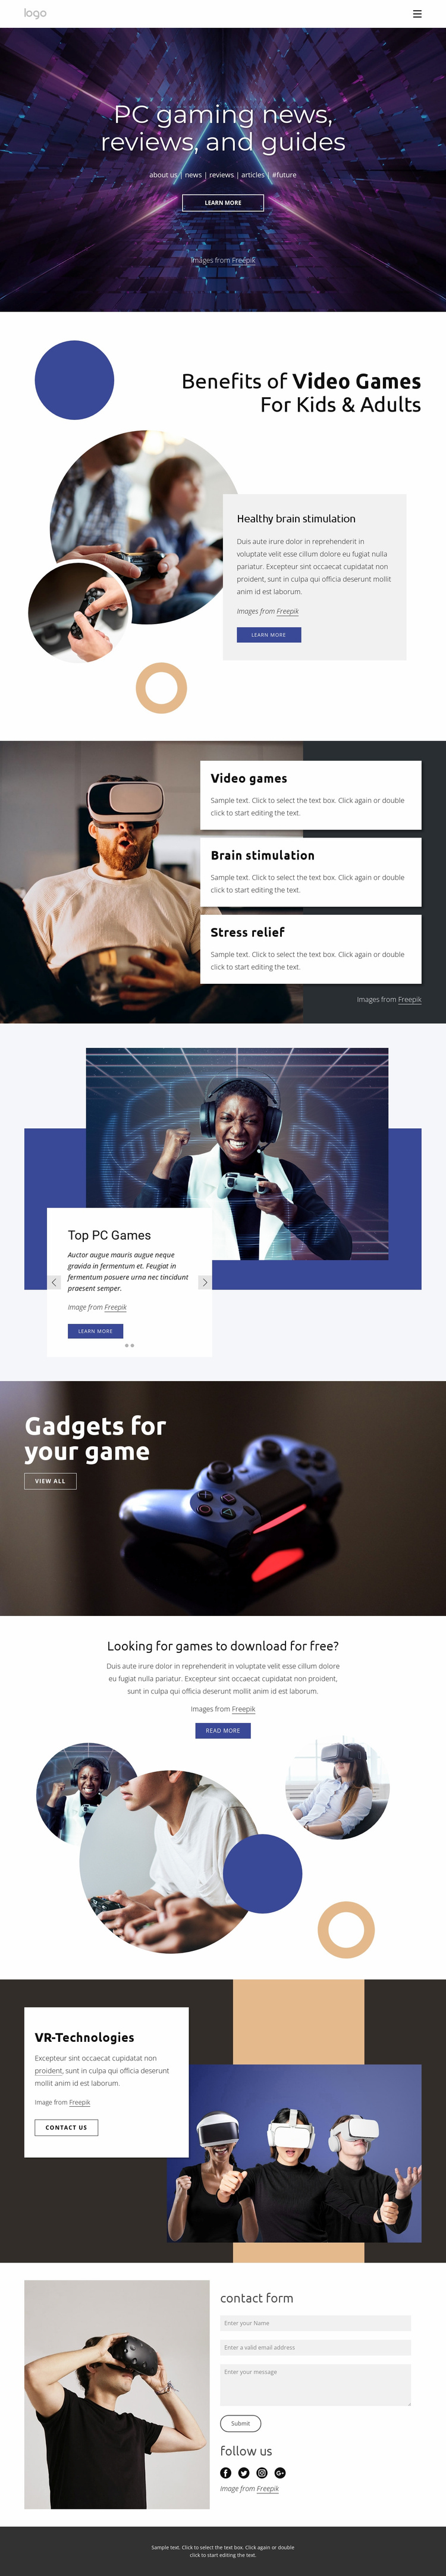 PC gaming news Website Template